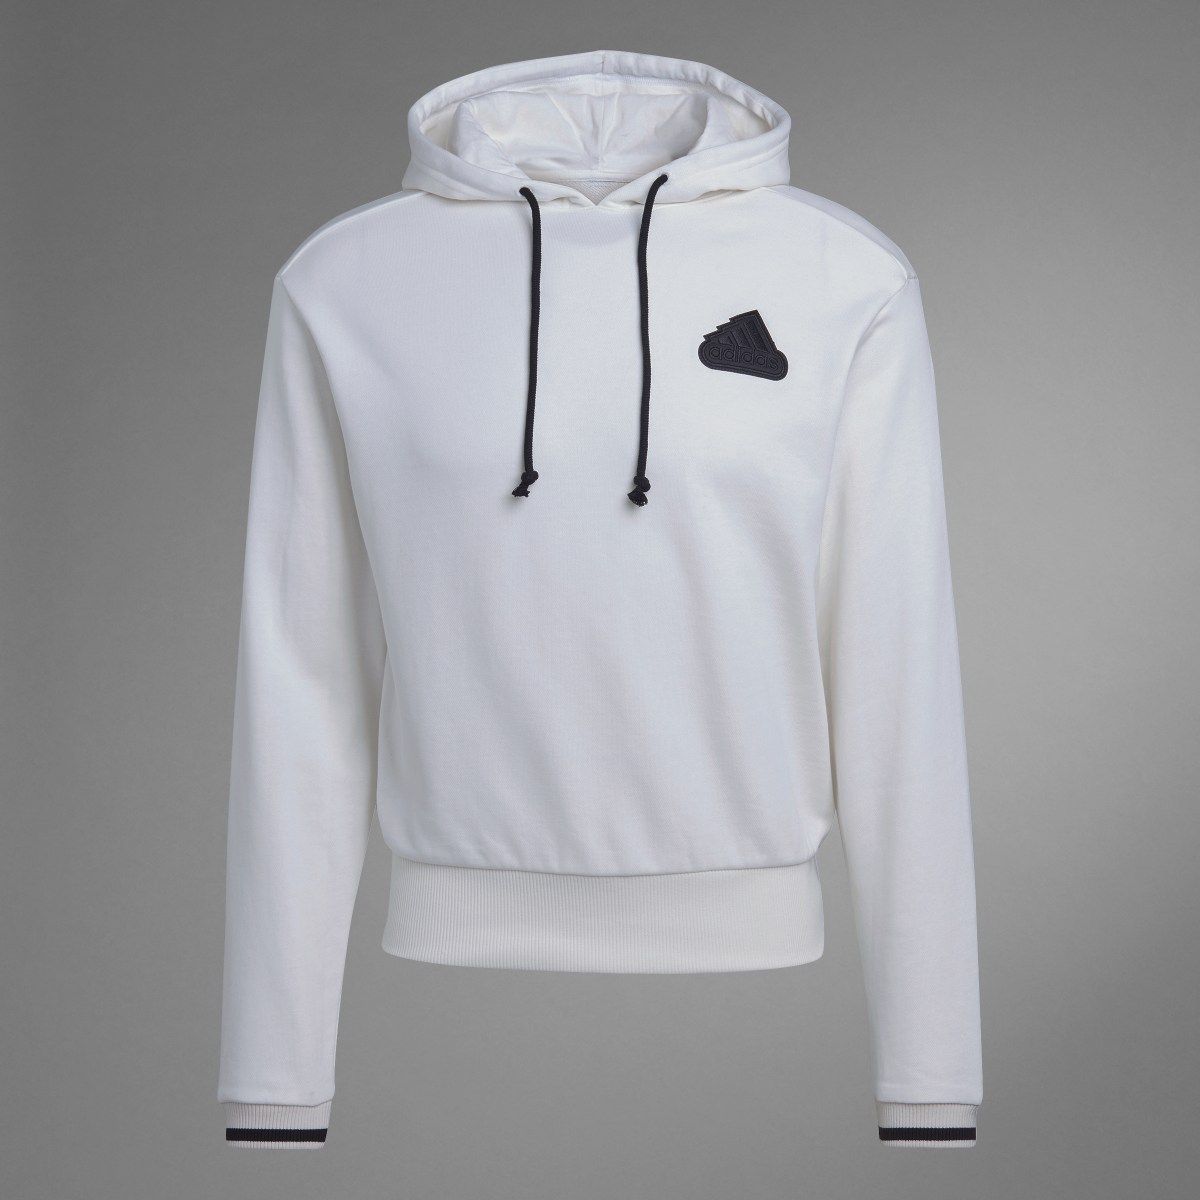 Adidas French Terry Hoodie (Gender Neutral). 11